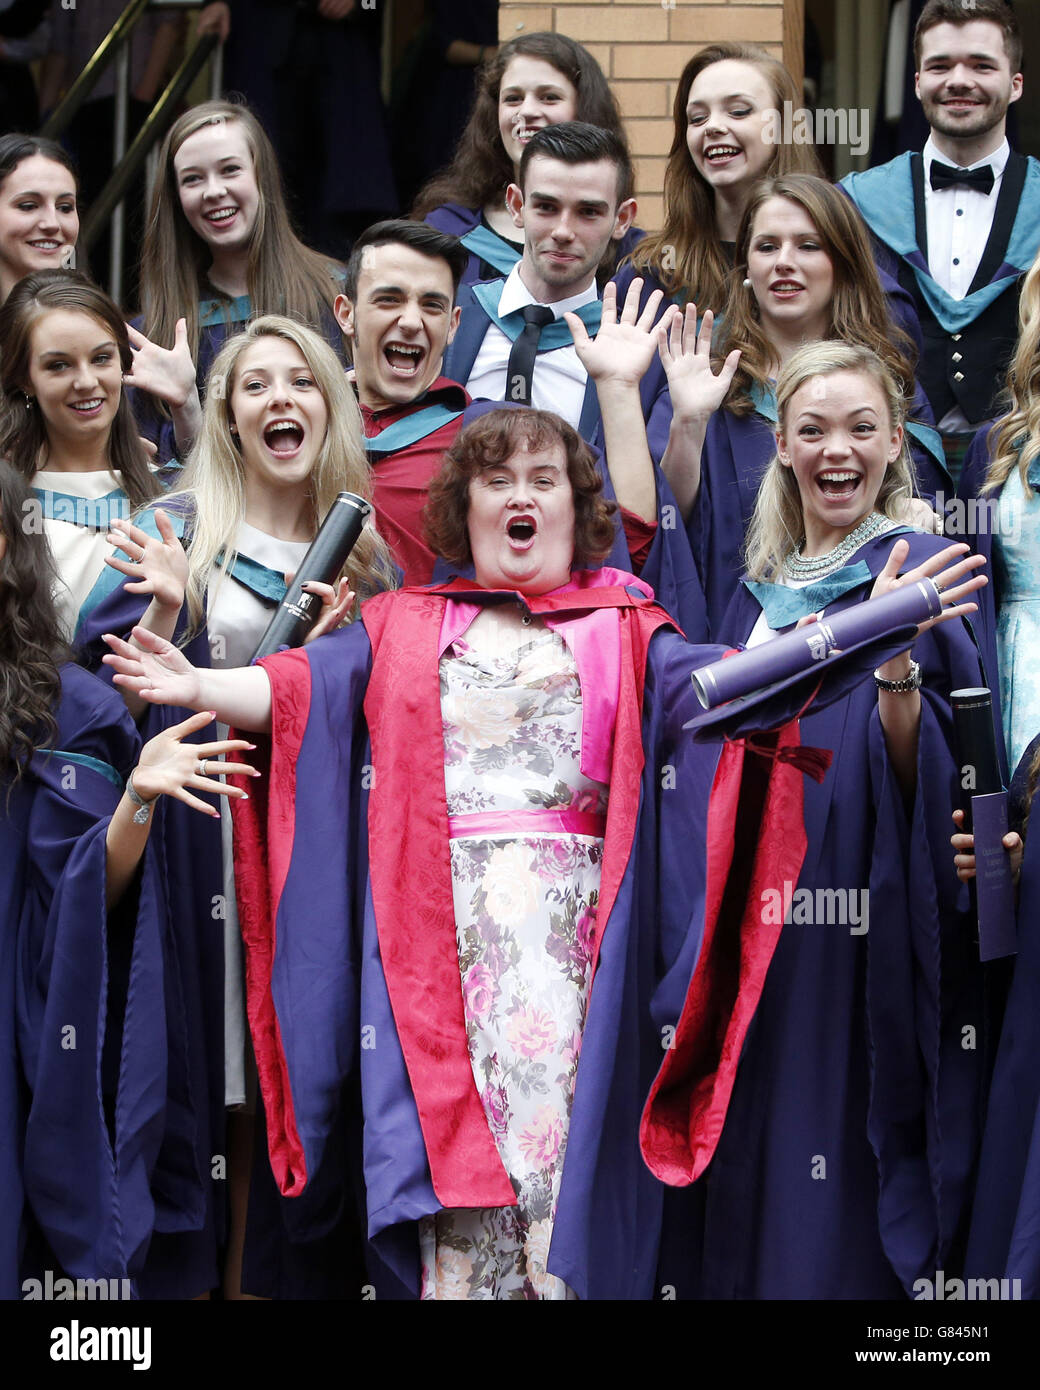 Susan Boyle (centre front) receives an Honorary Doctorate during a graduation ceremony from the Royal Conservatoire of Scotland in Glasgow for her contribution to the music industry. Stock Photo